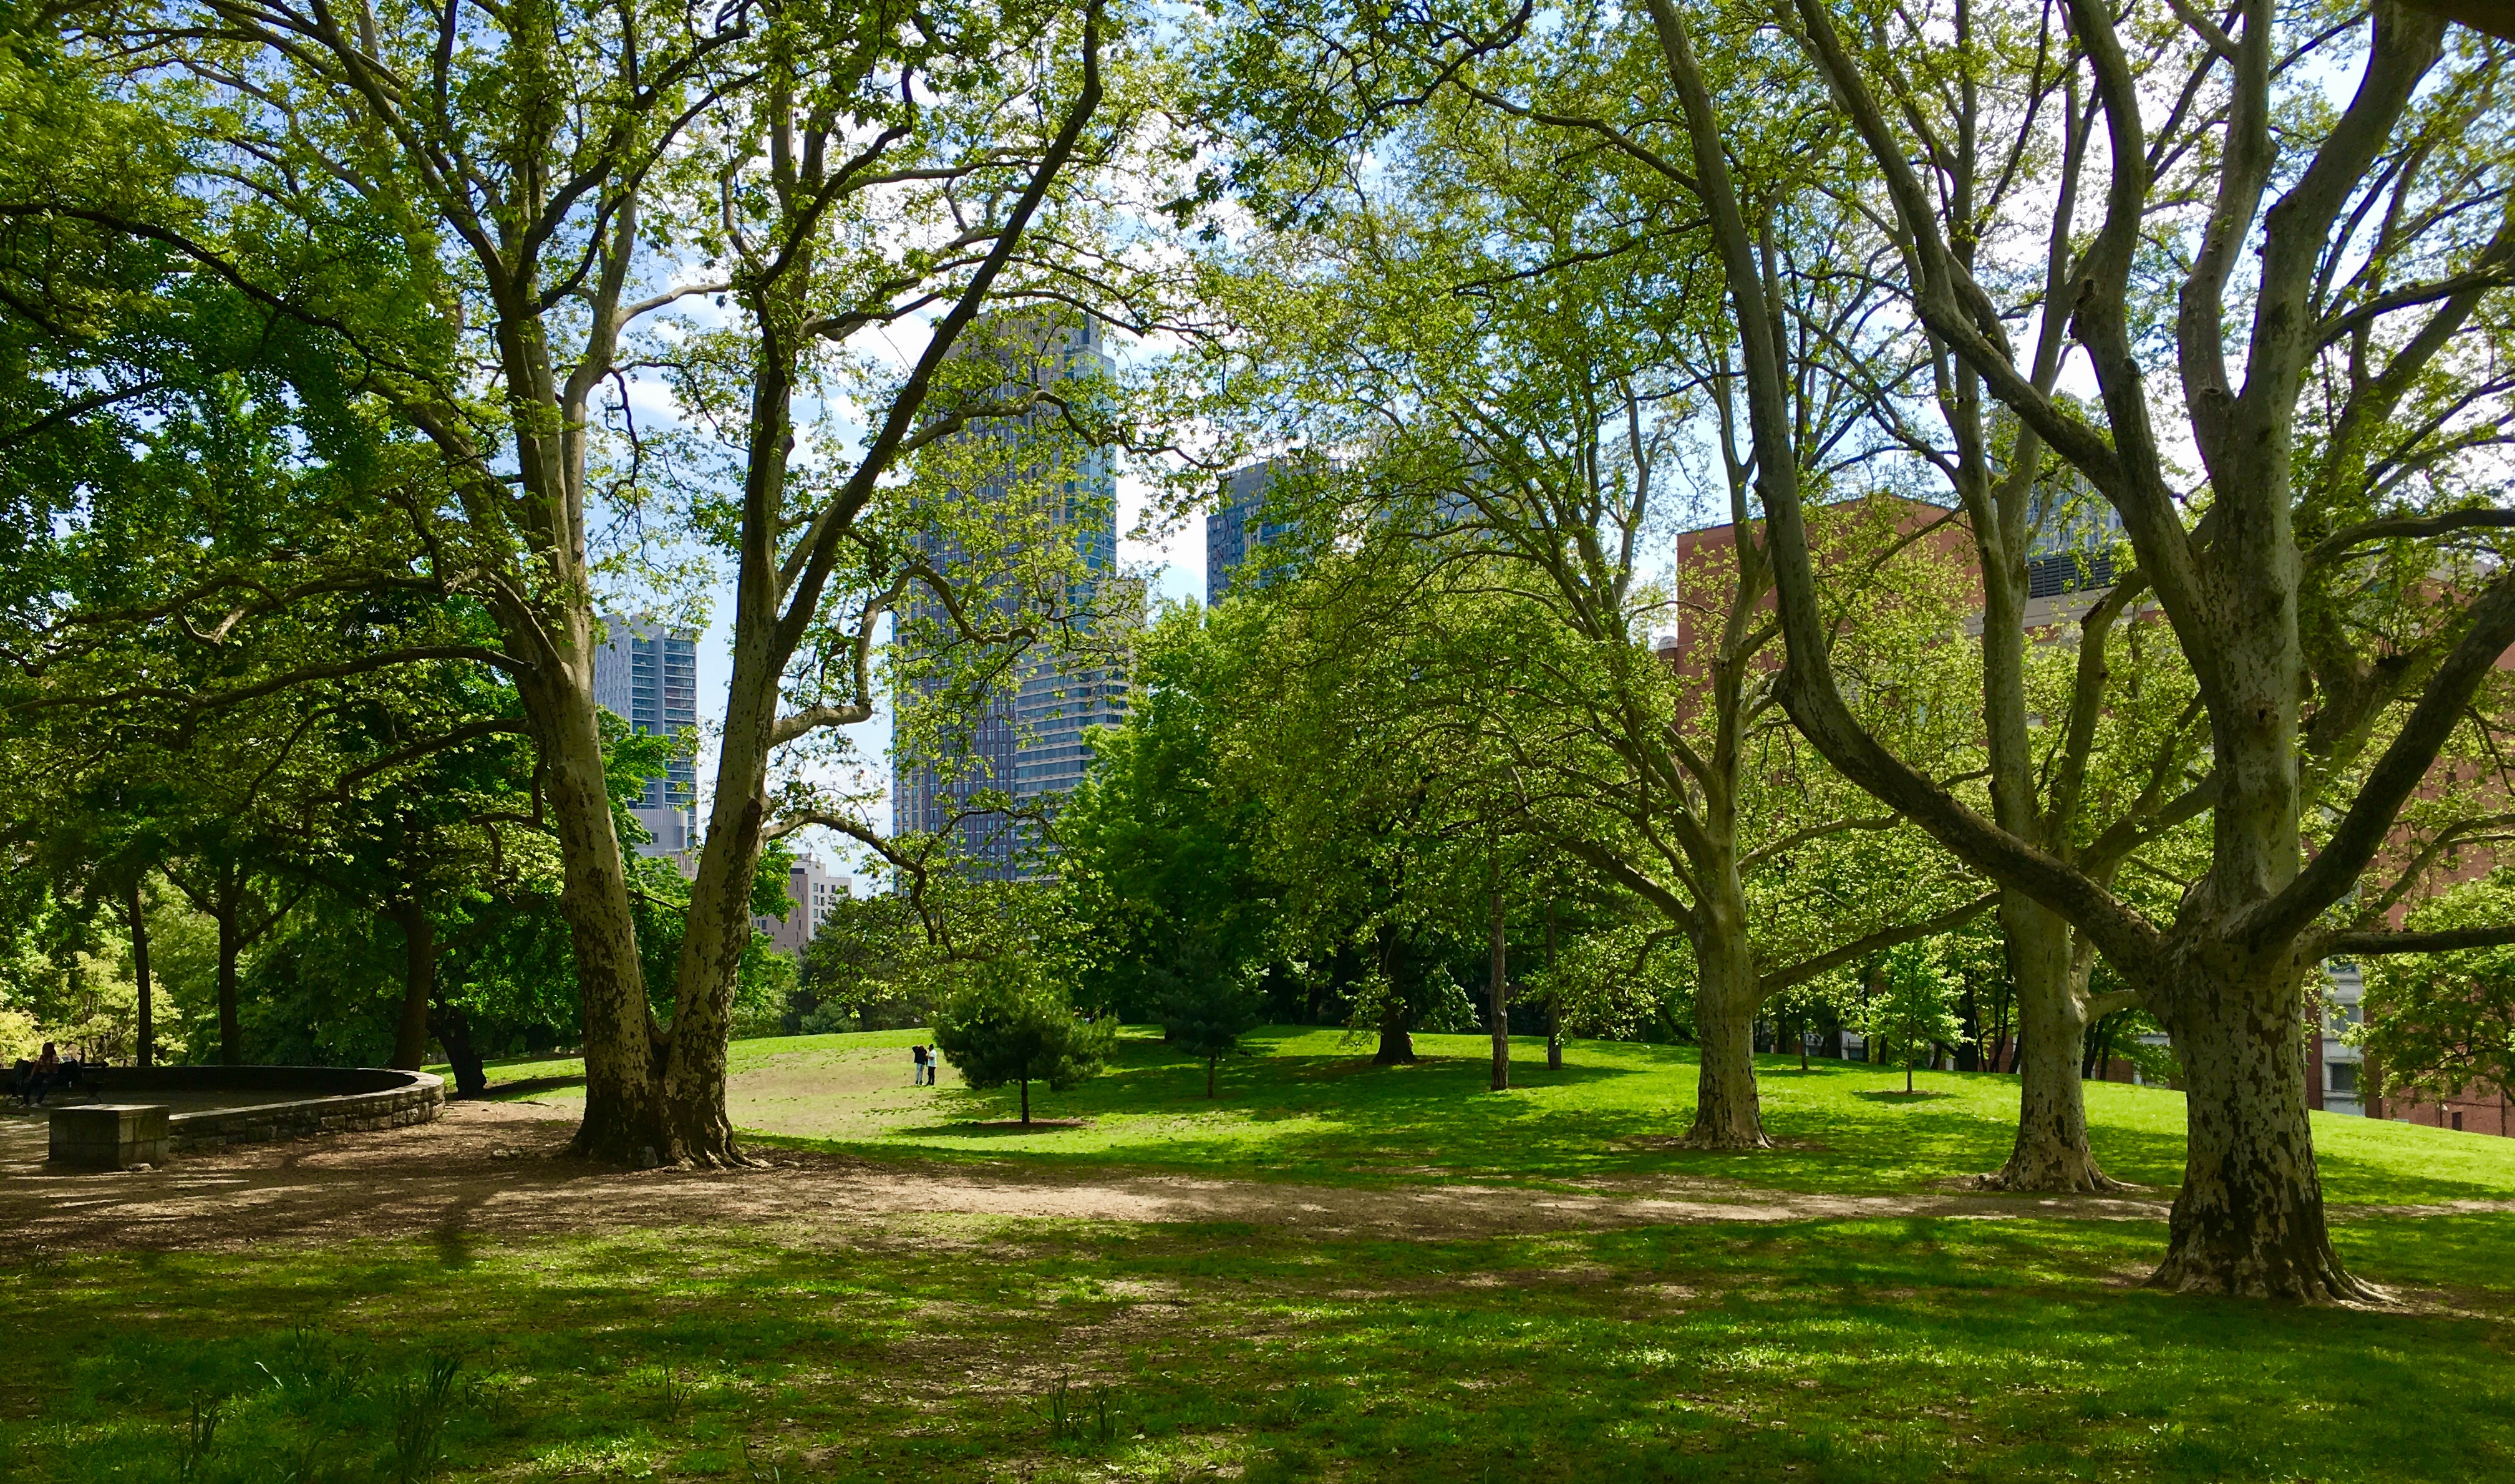 Mature trees shouldn’t be removed from Fort Greene Park, the Sierra Club and neighboring residents contend. Eagle photo by Lore Croghan